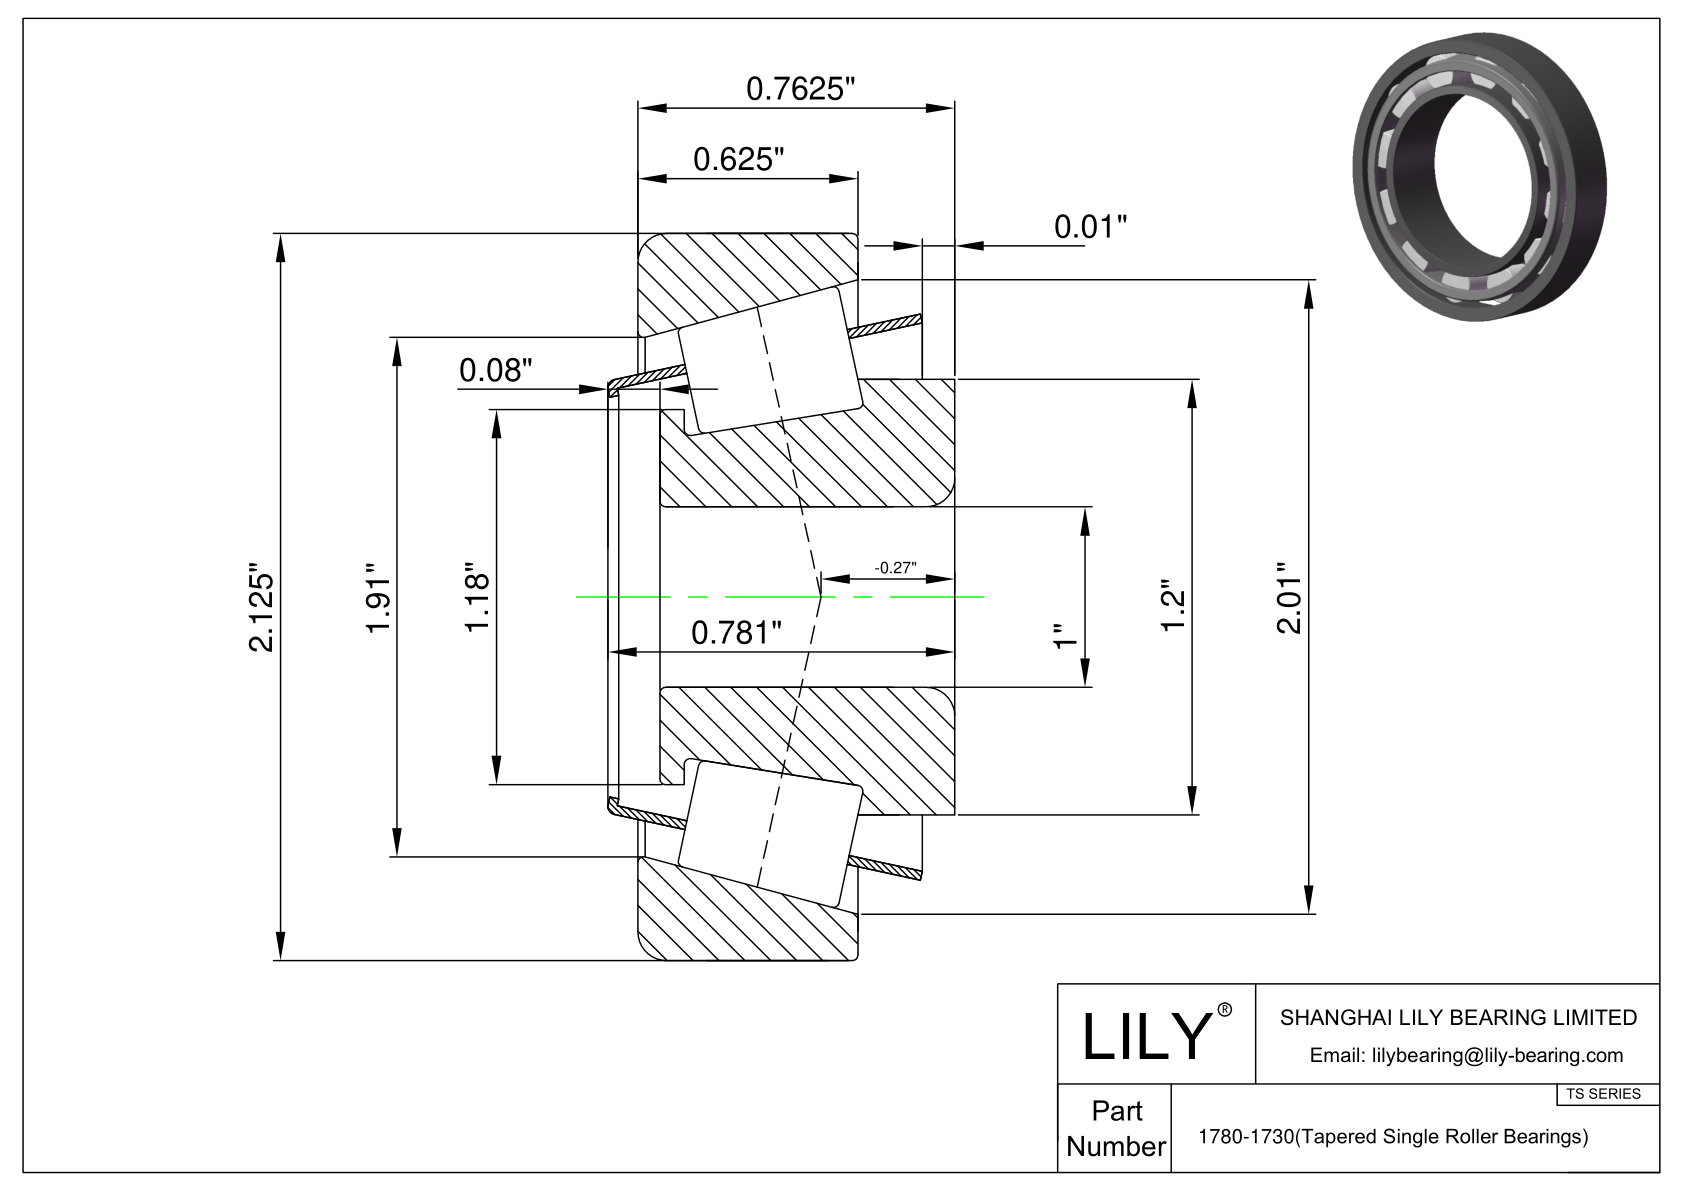 1780-1730 TS (Tapered Single Roller Bearings) (Imperial) cad drawing